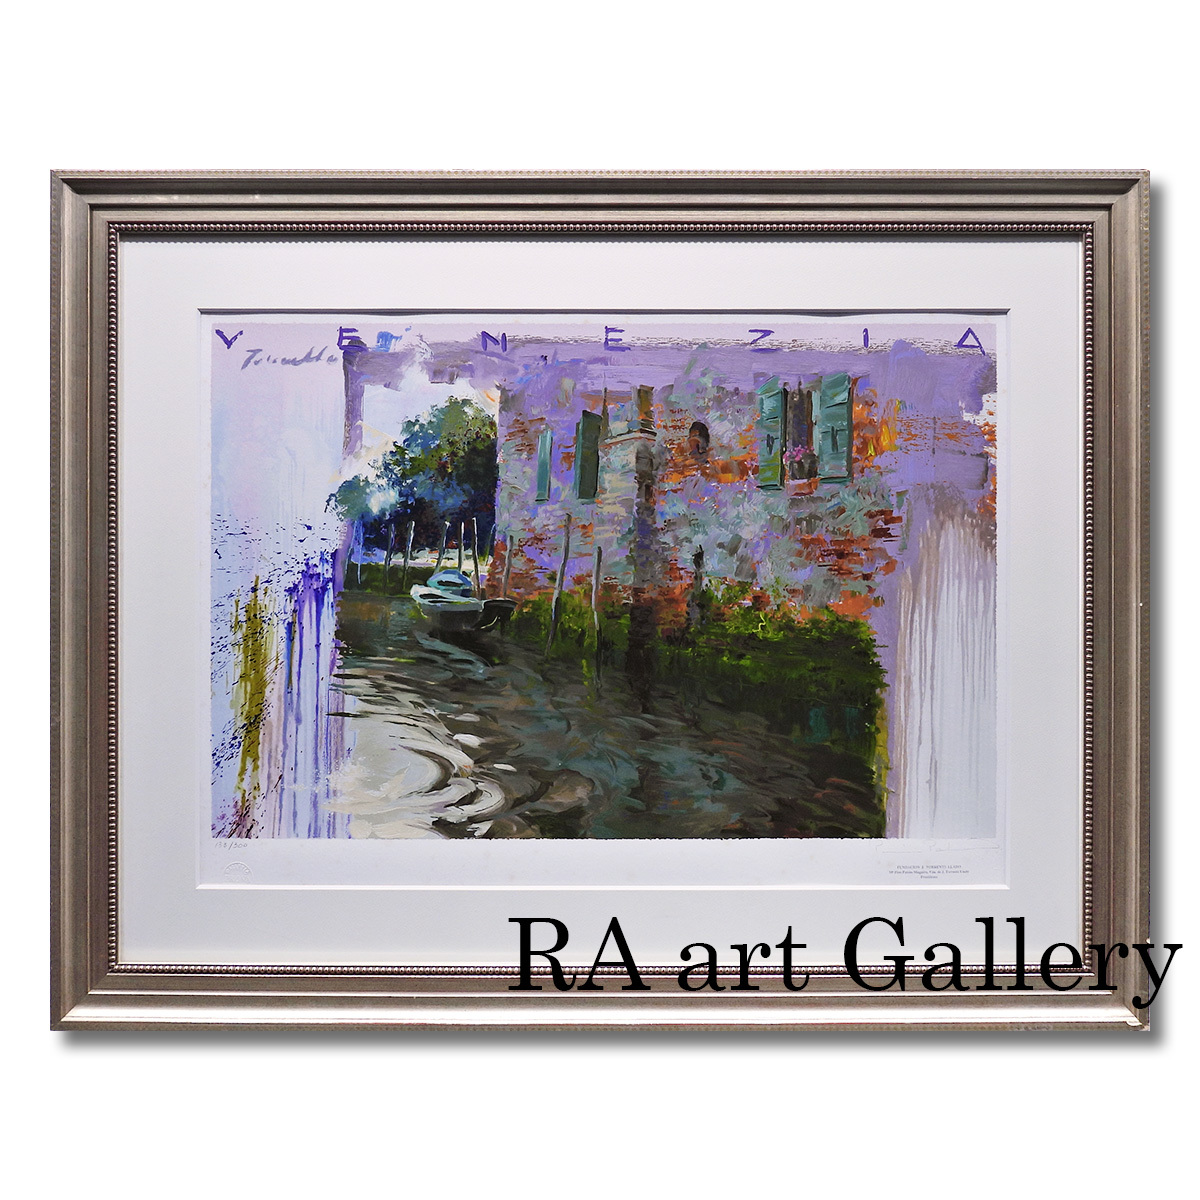 Trenz Llad Torcello Landscape painting Venice Italy Last impressionist of the 20th century Canal Boat Framed Print Painting Guaranteed authentic Price negotiable, Artwork, Prints, Silkscreen